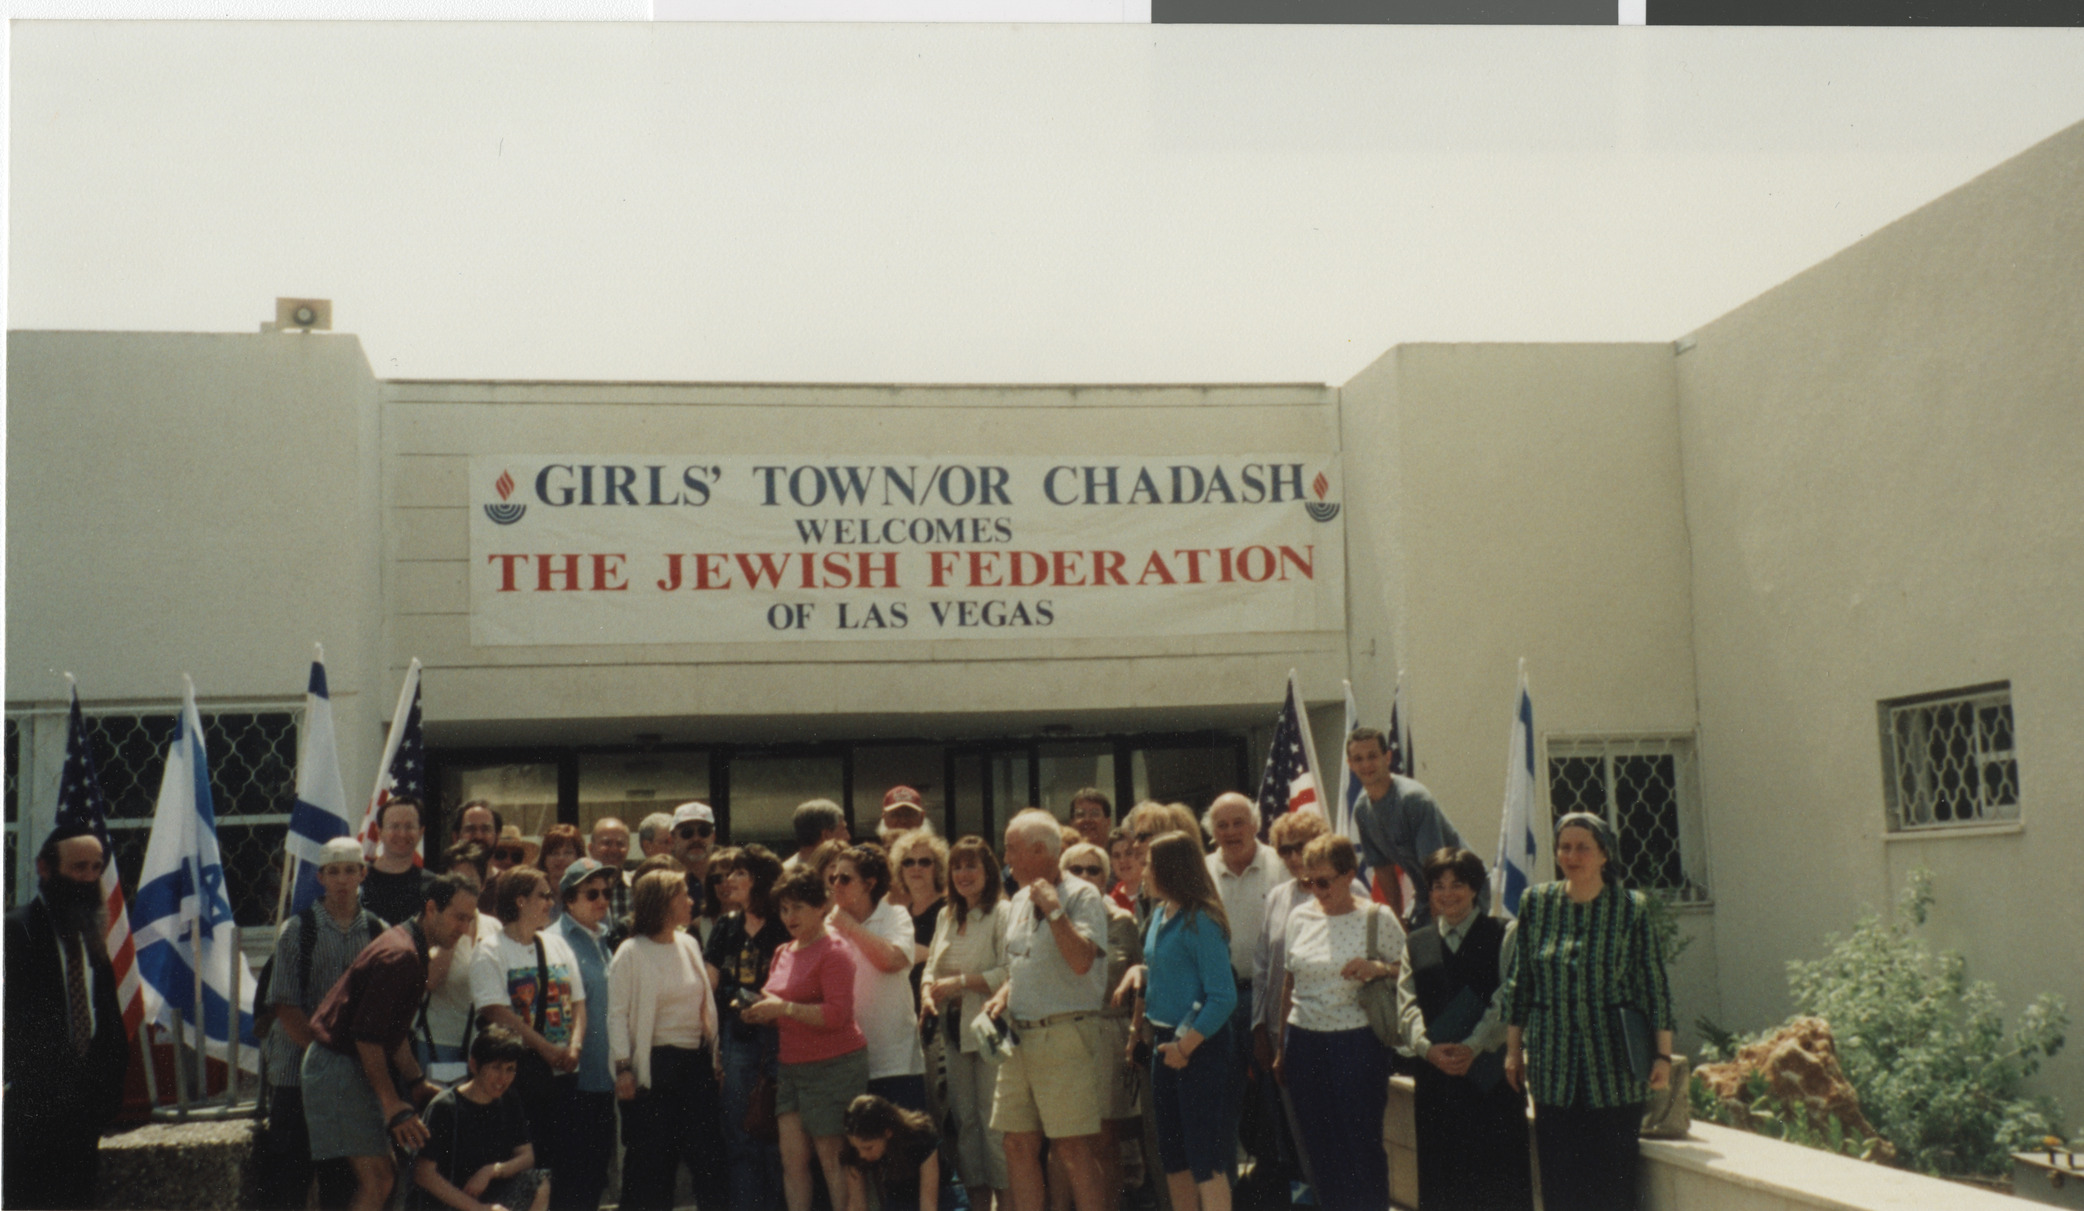 Photograph of group in front of building with sign ""Girls Town/Or Chadash, Welcomes the Jewish Federation of Las Vegas""